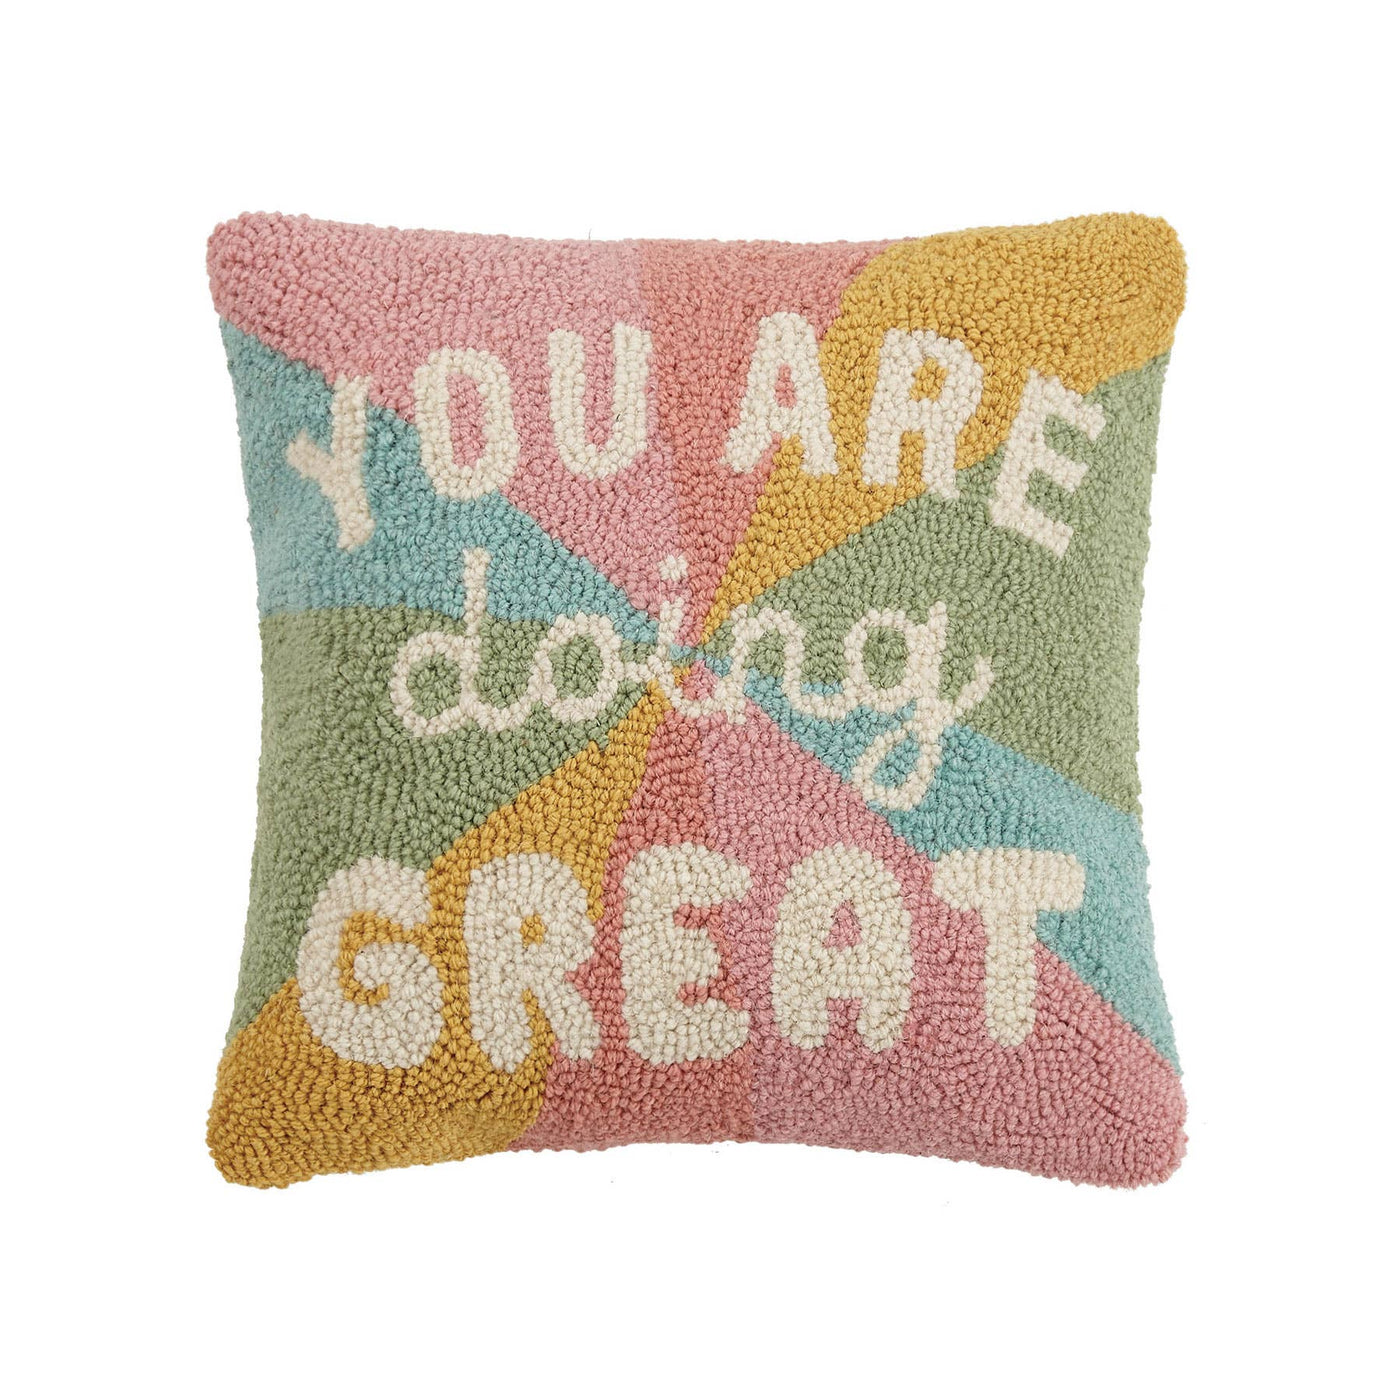 You Are Doing Great Hook Pillow